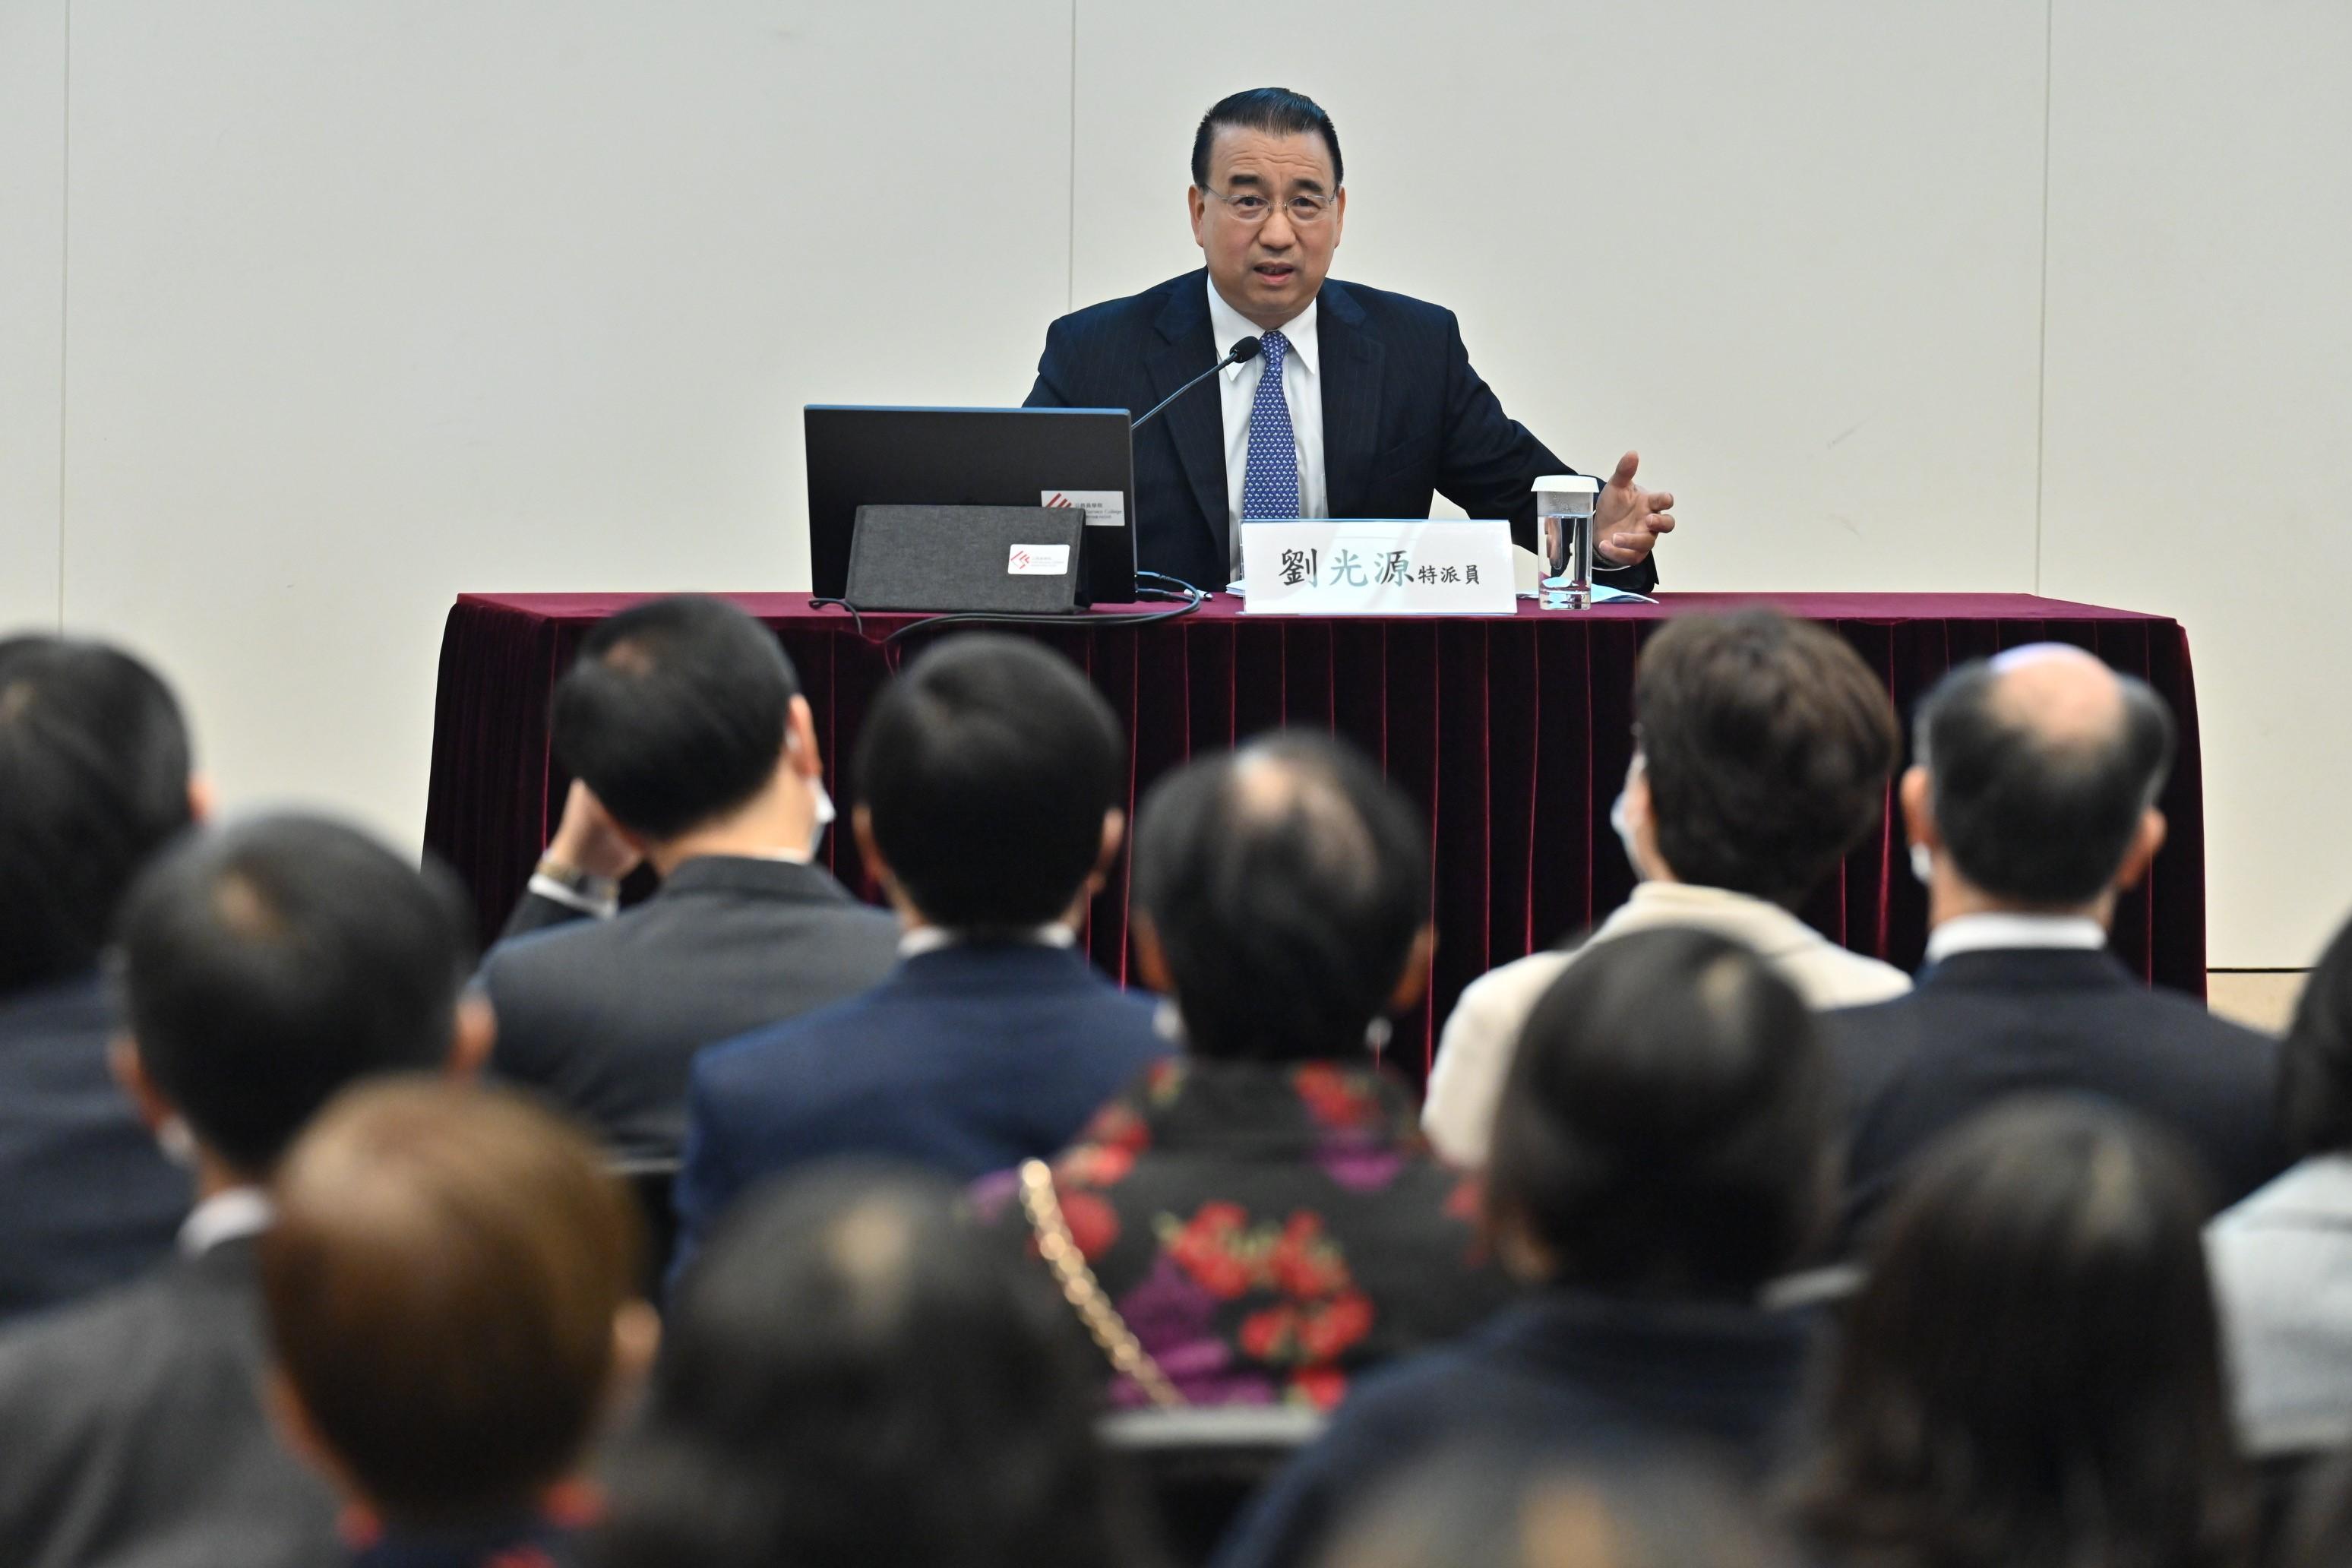 The Civil Service College today (December 17) held a thematic briefing session on "International Landscape and China's Foreign Relations in 2021" jointly with the Office of the Commissioner of the Ministry of Foreign Affairs in the Hong Kong Special Administrative Region (HKSAR). Photo shows the Commissioner of the Ministry of Foreign Affairs in the HKSAR, Mr Liu Guangyuan, delivering the briefing.